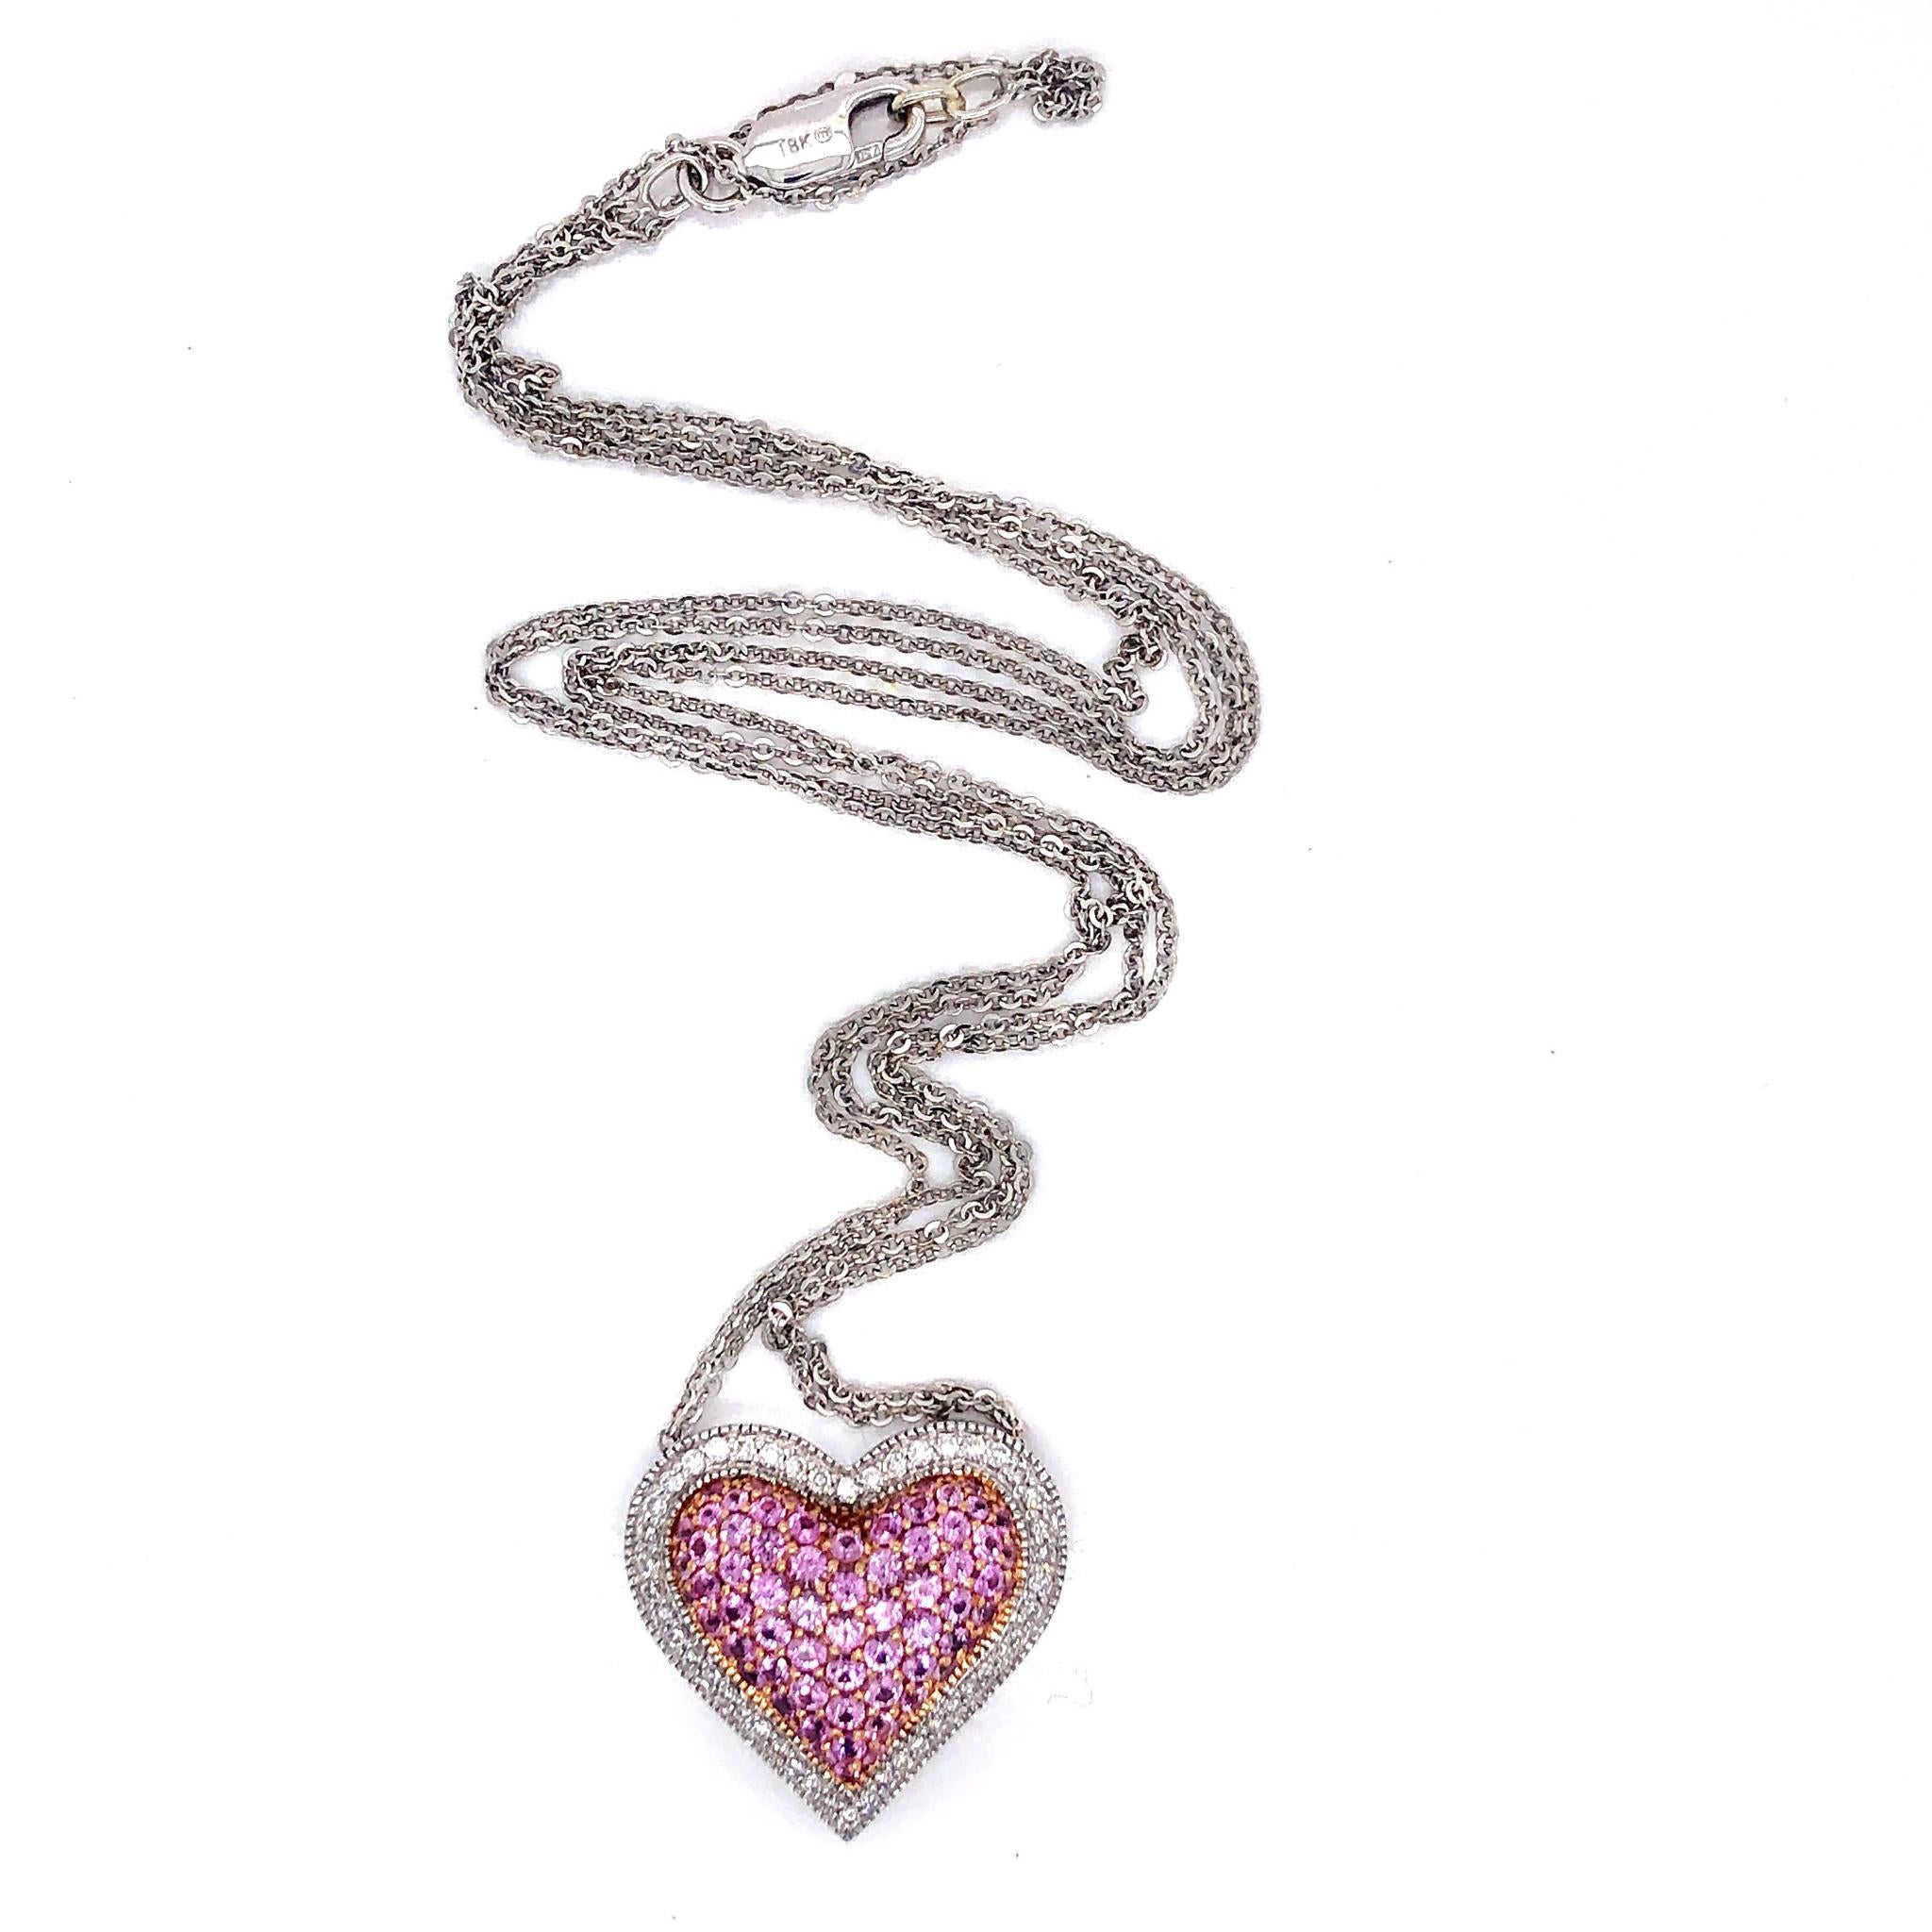 GIA Natural No Heat Pink Sapphire and Diamond Heart Necklace 18k Gold

Condition:  Excellent Condition
Metal:  18k Gold (Marked, and Professionally Tested)
Gemstone:  GIA Certified Natural No Heat Pink Sapphires 1.07ctw
Diamonds:  Round Brilliant